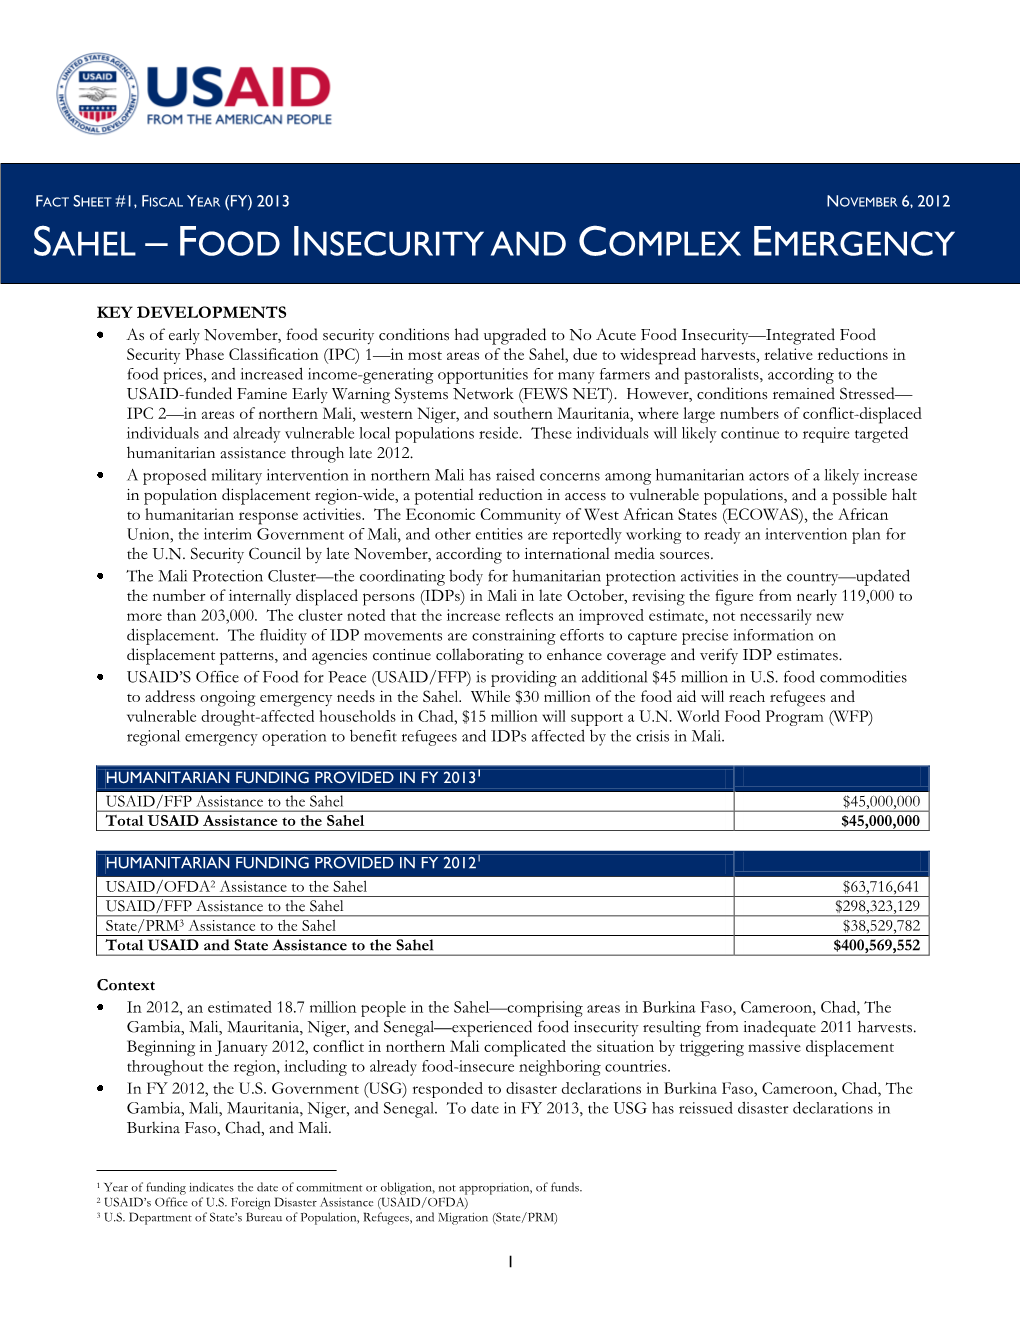 Sahel Food Security and Complex Emergency